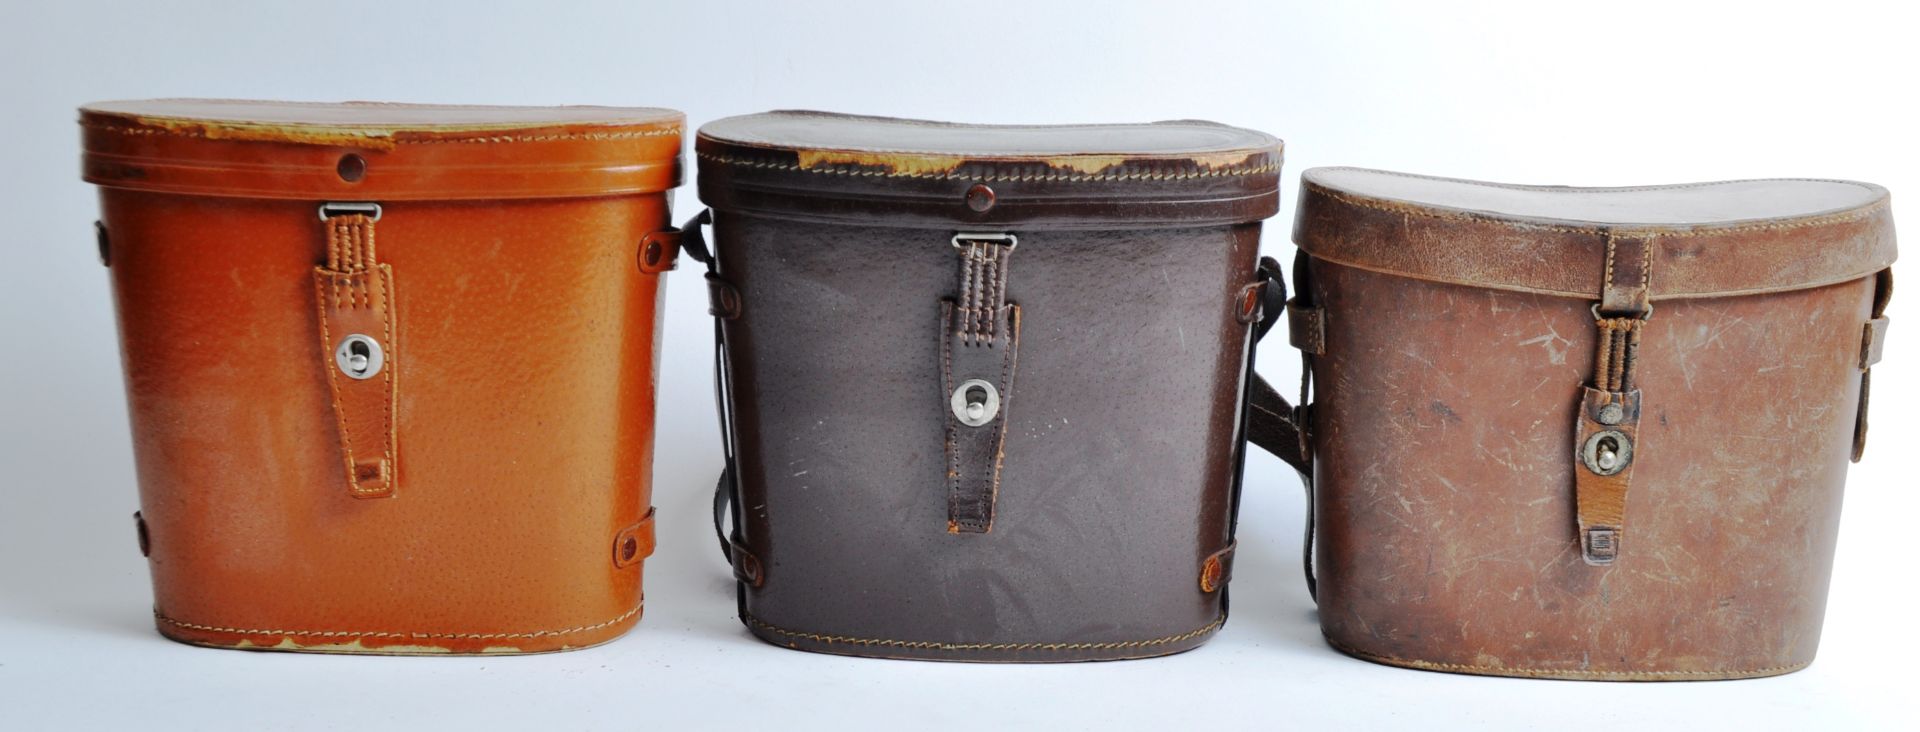 COLLECTION OF 8 X VINTAGE LEATHER BINOCULAR CASES - Image 4 of 4